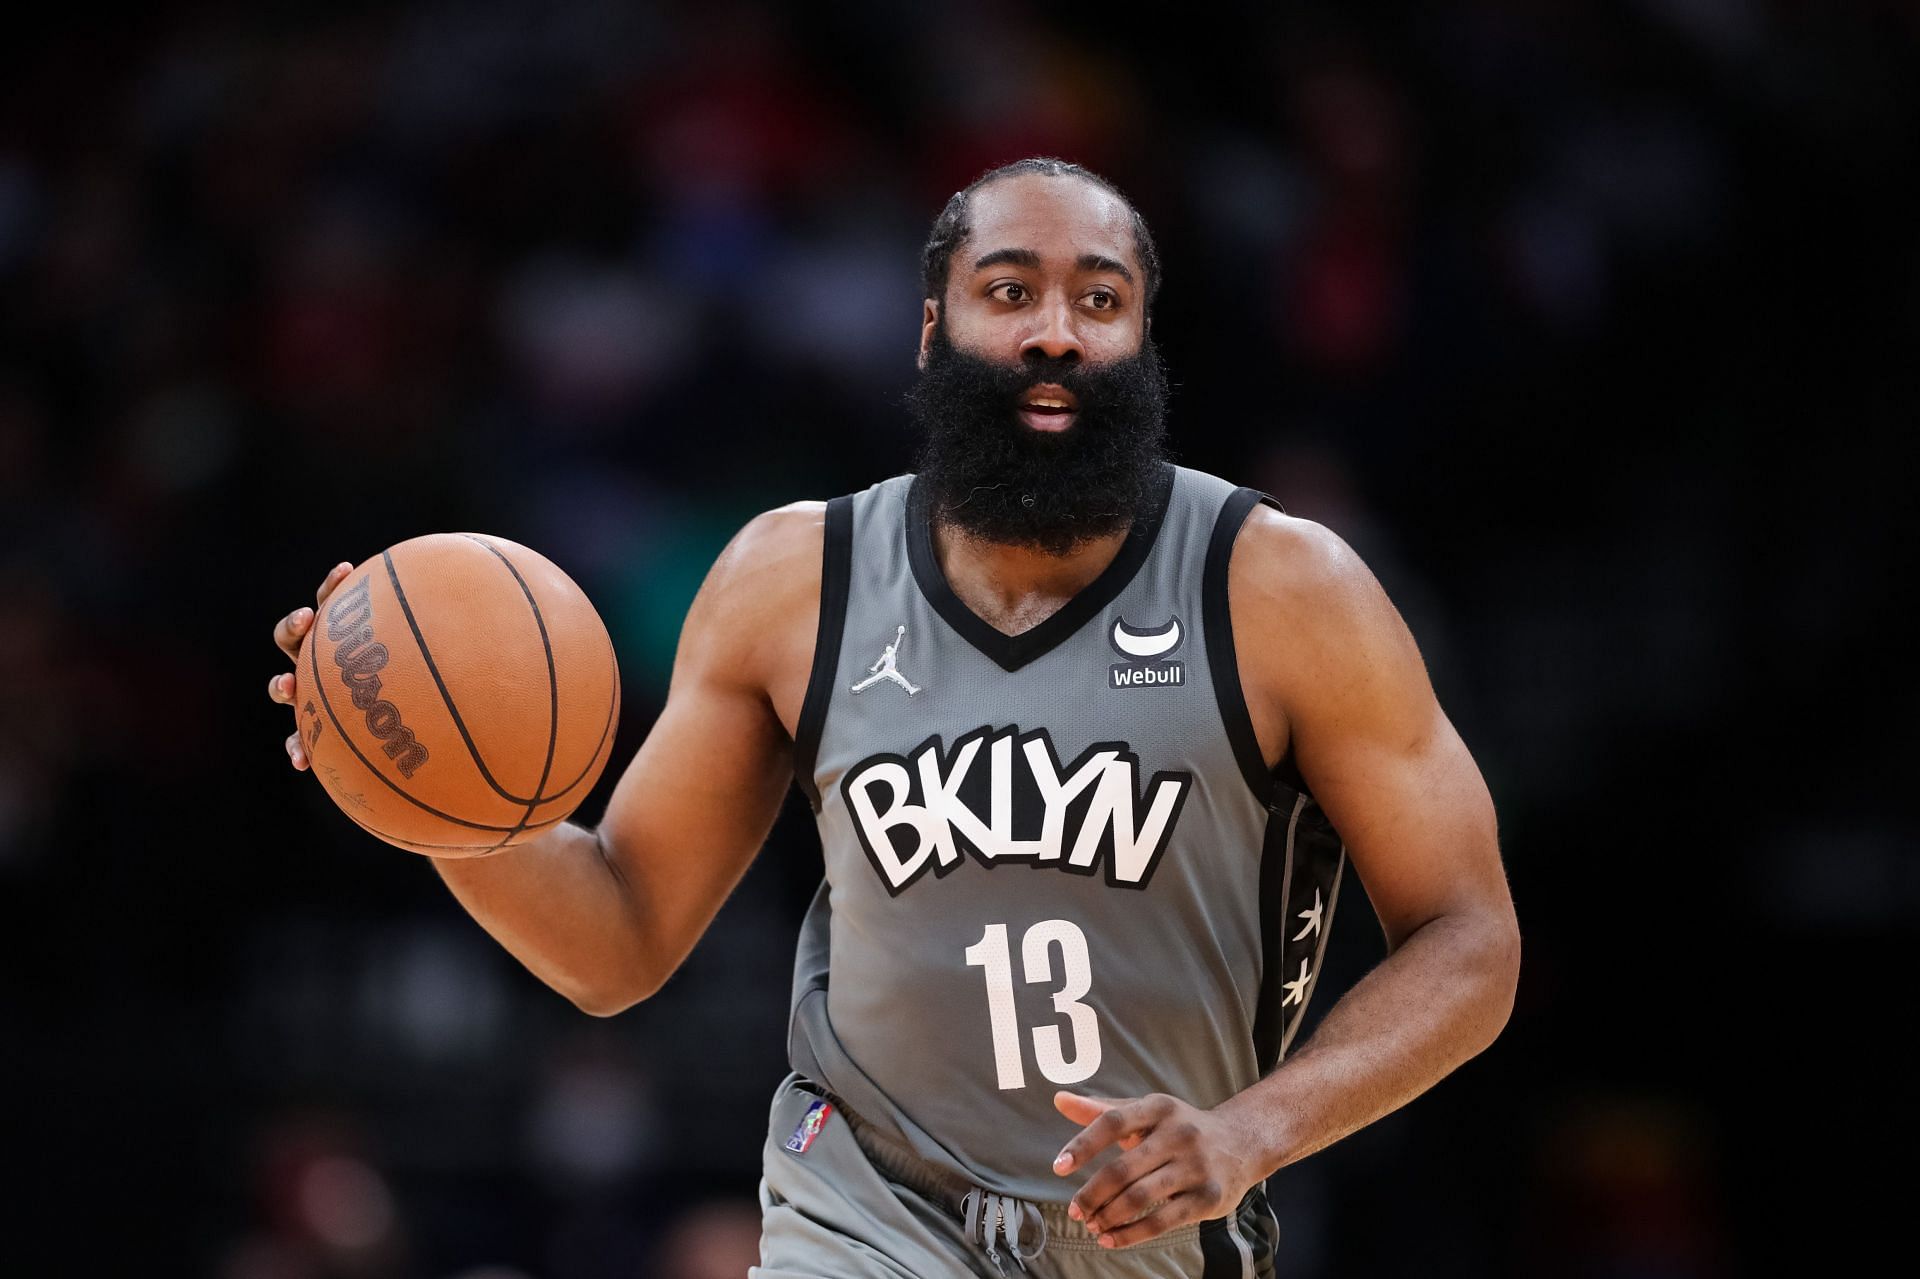 James Harden looks to make a play in the Brooklyn Nets vs Houston Rockets game.